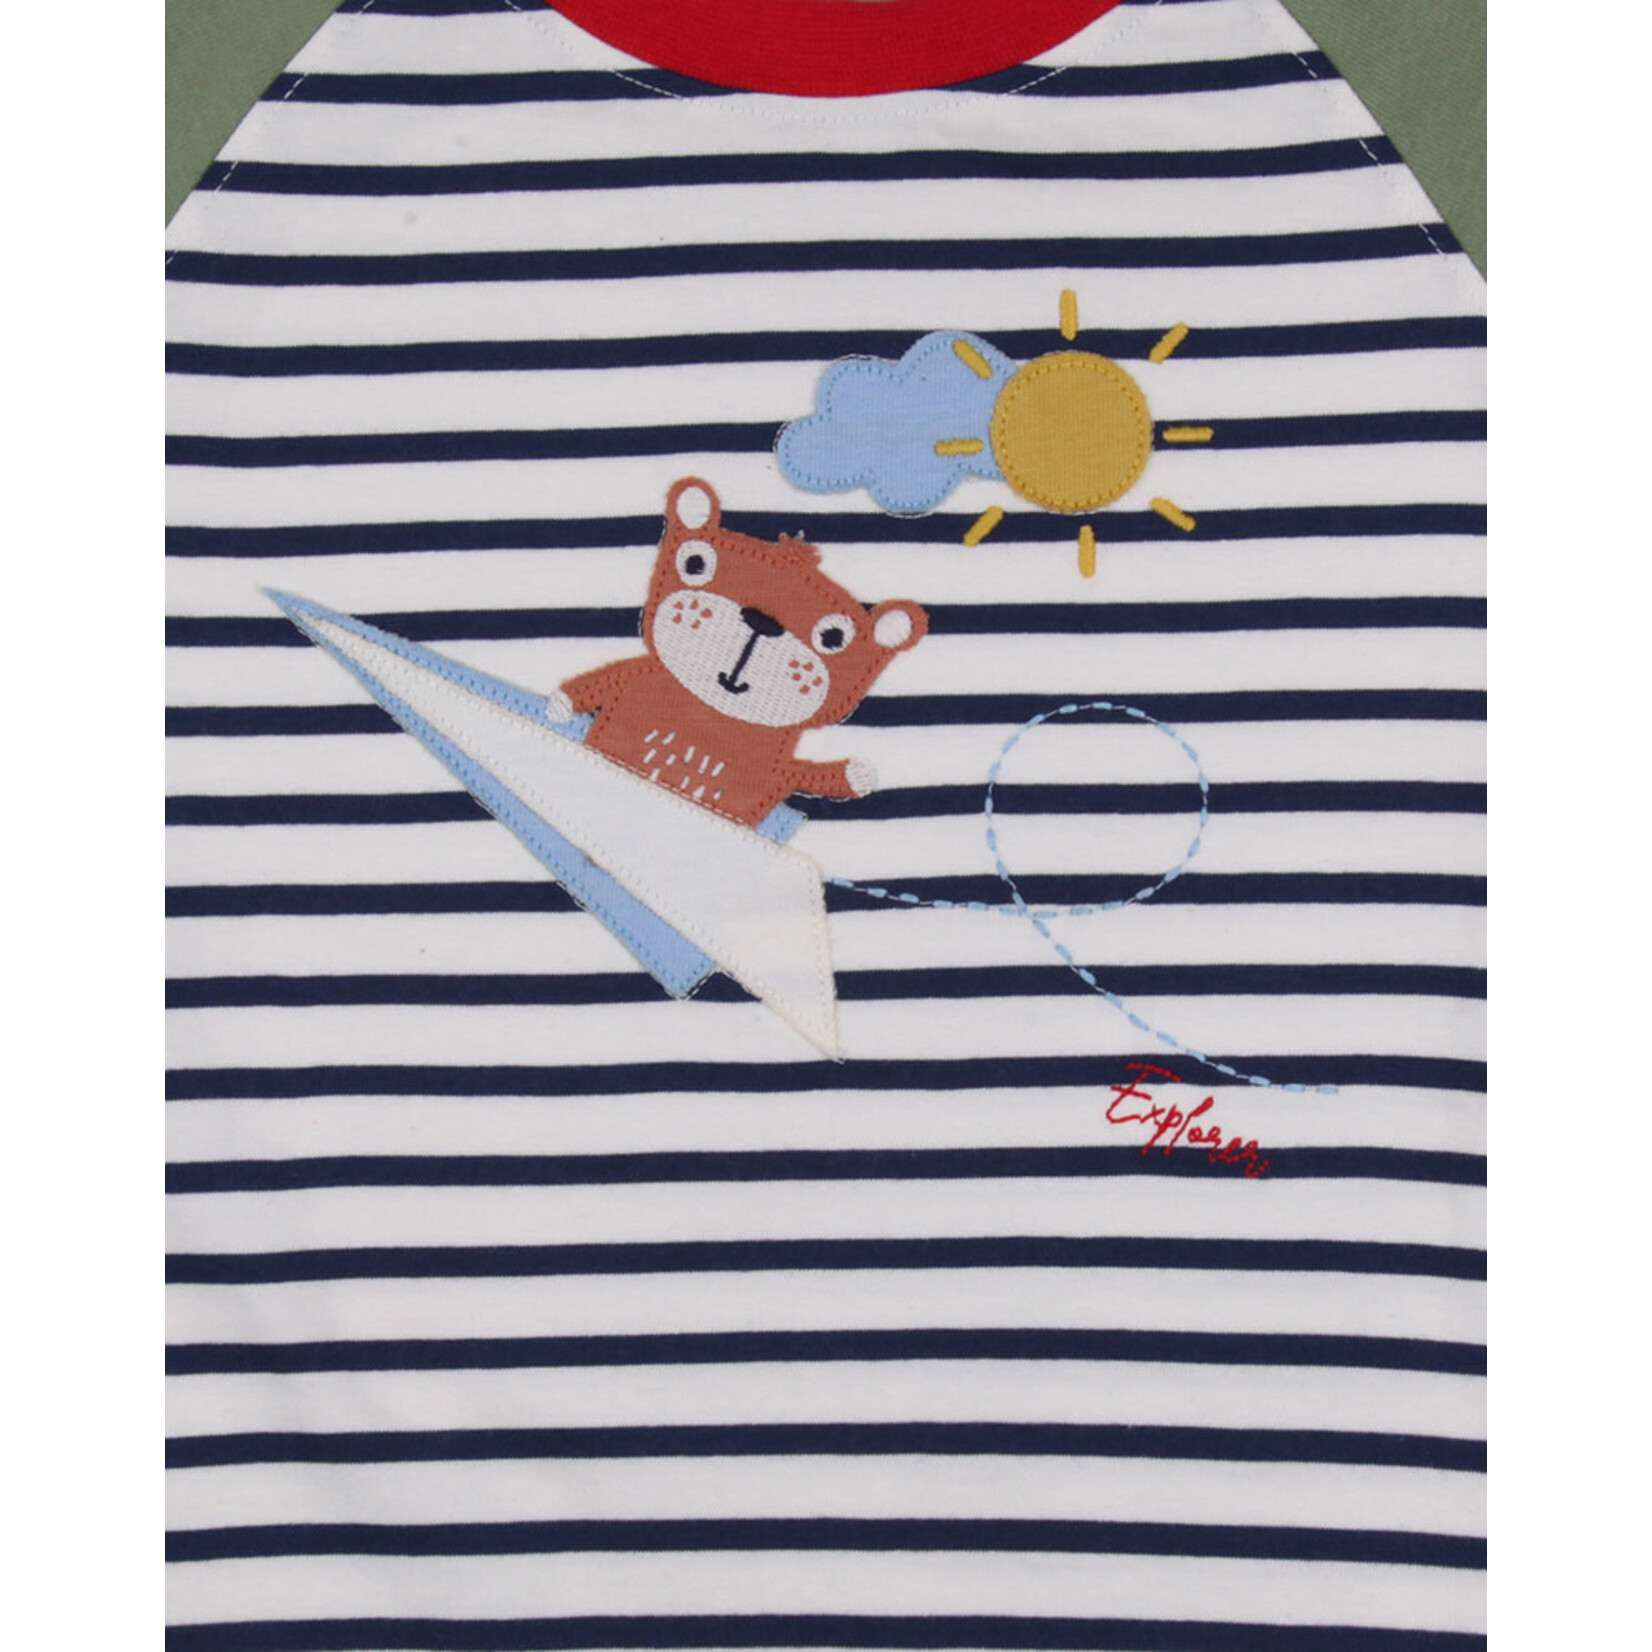 Lilly+Sid LILLY+SID - Short Sleeve Striped T-Shirt with Teddy Bear on a Plane Appliqué